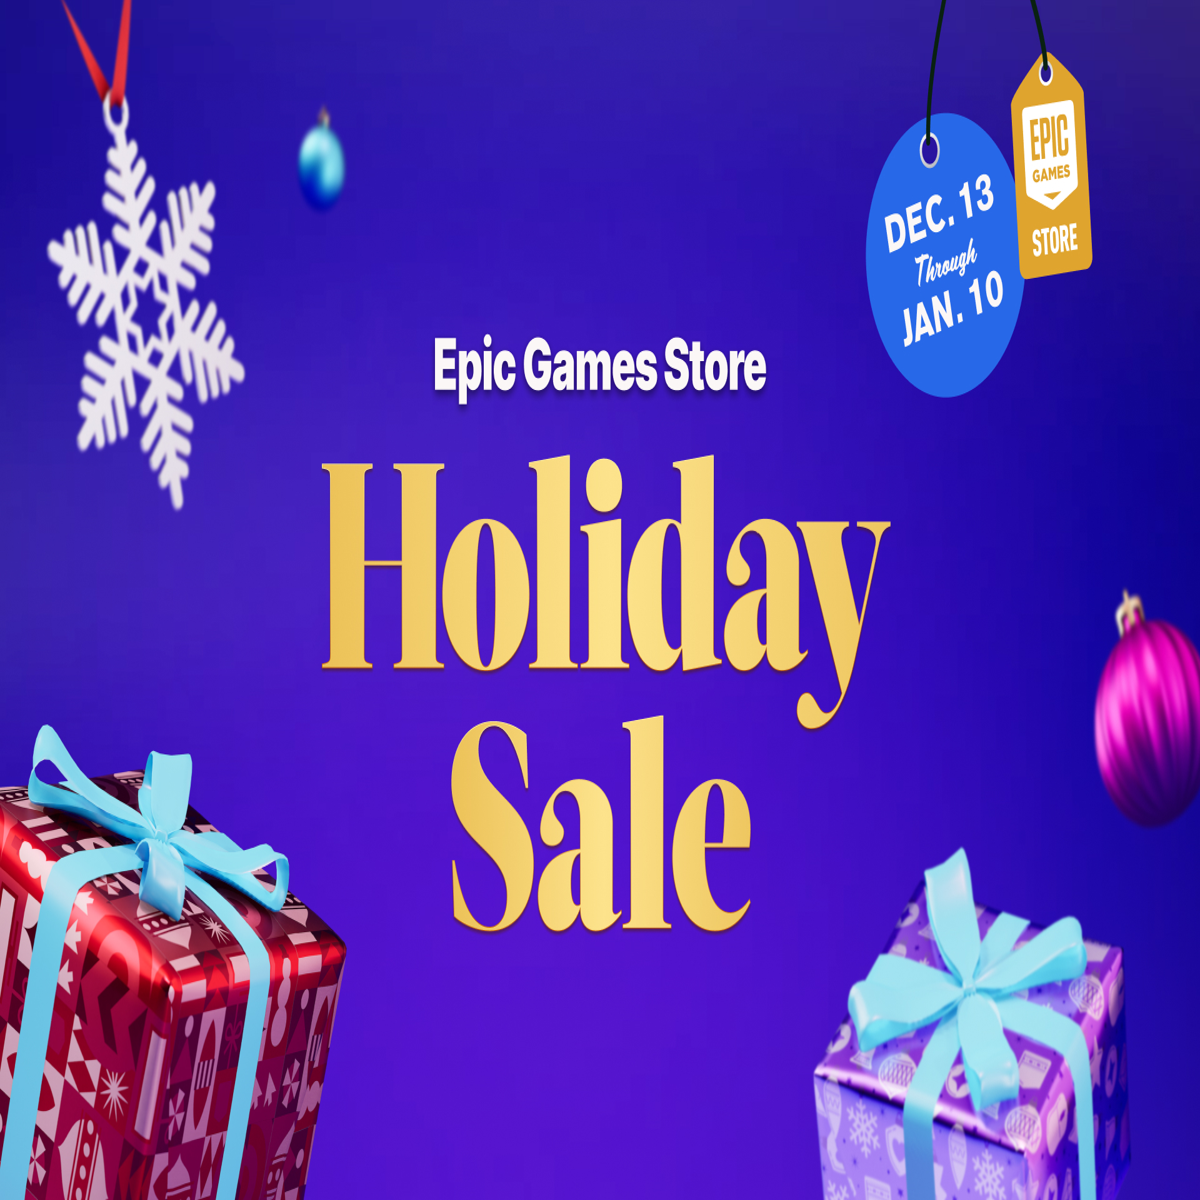 The Epic Game Store Holiday Sale - what's worth buying? - ReadWrite